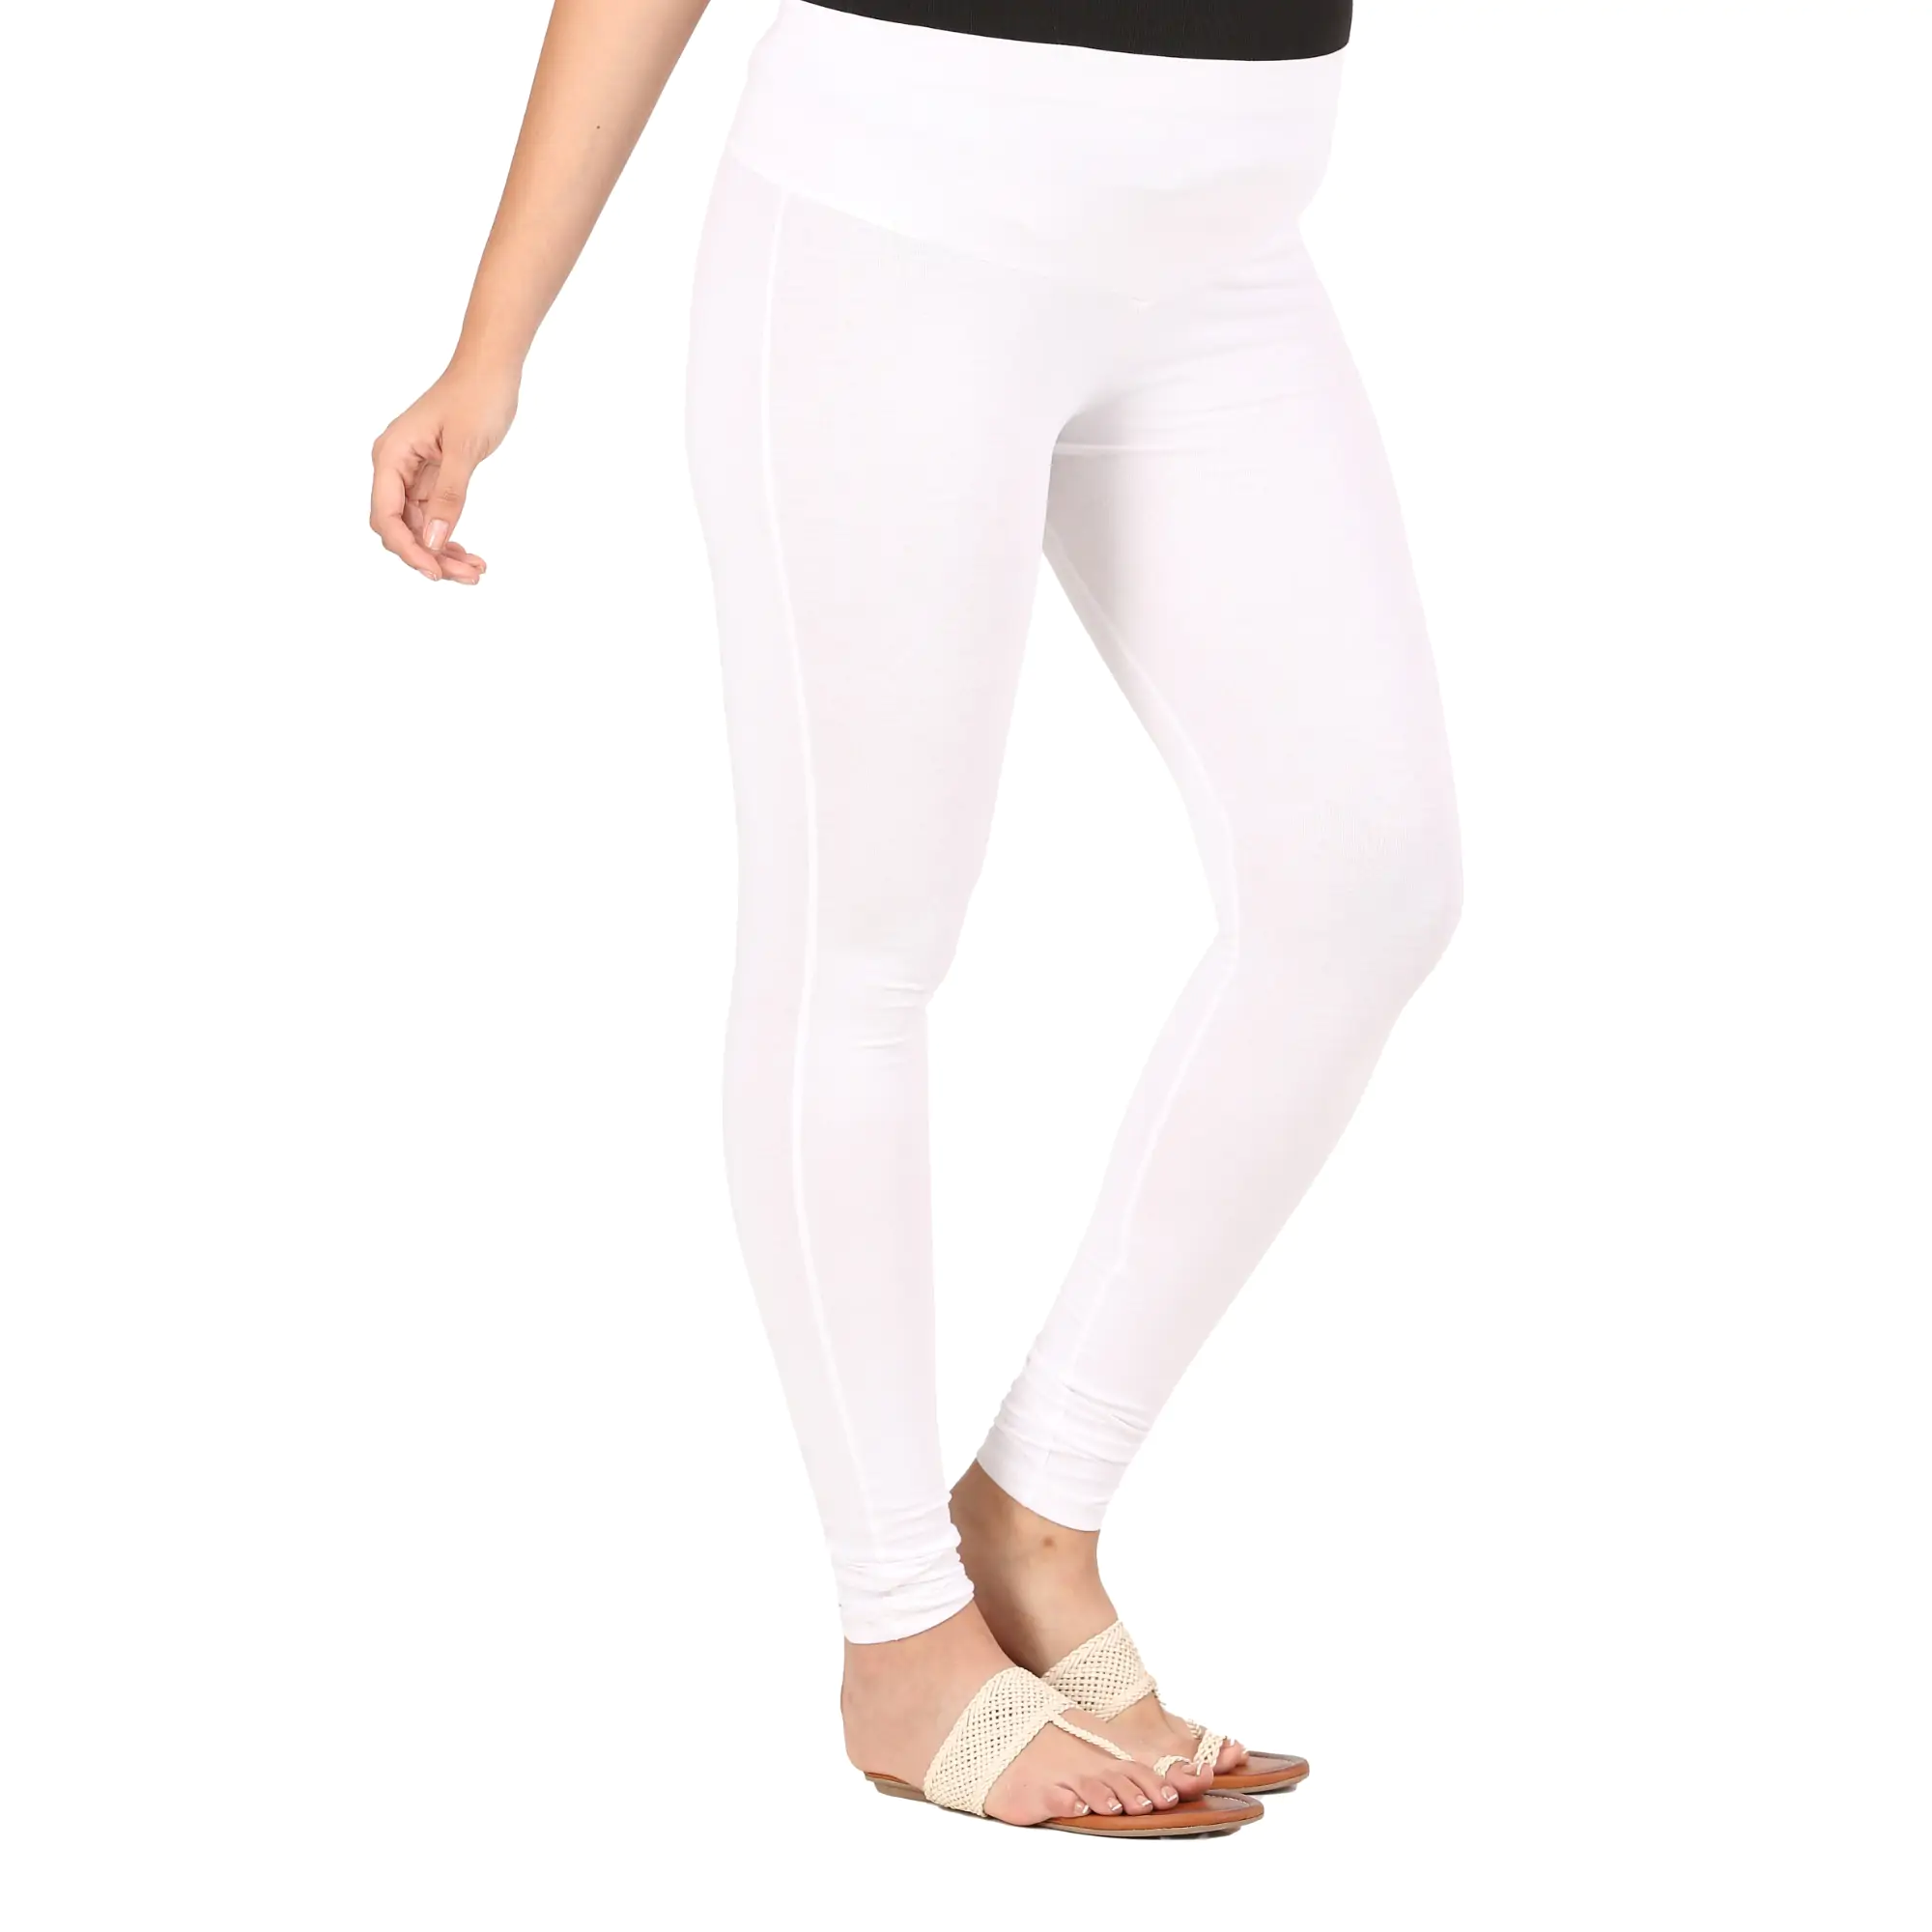 Mylo Stretchable Pregnancy & Post Delivery Leggings - White (XXL)